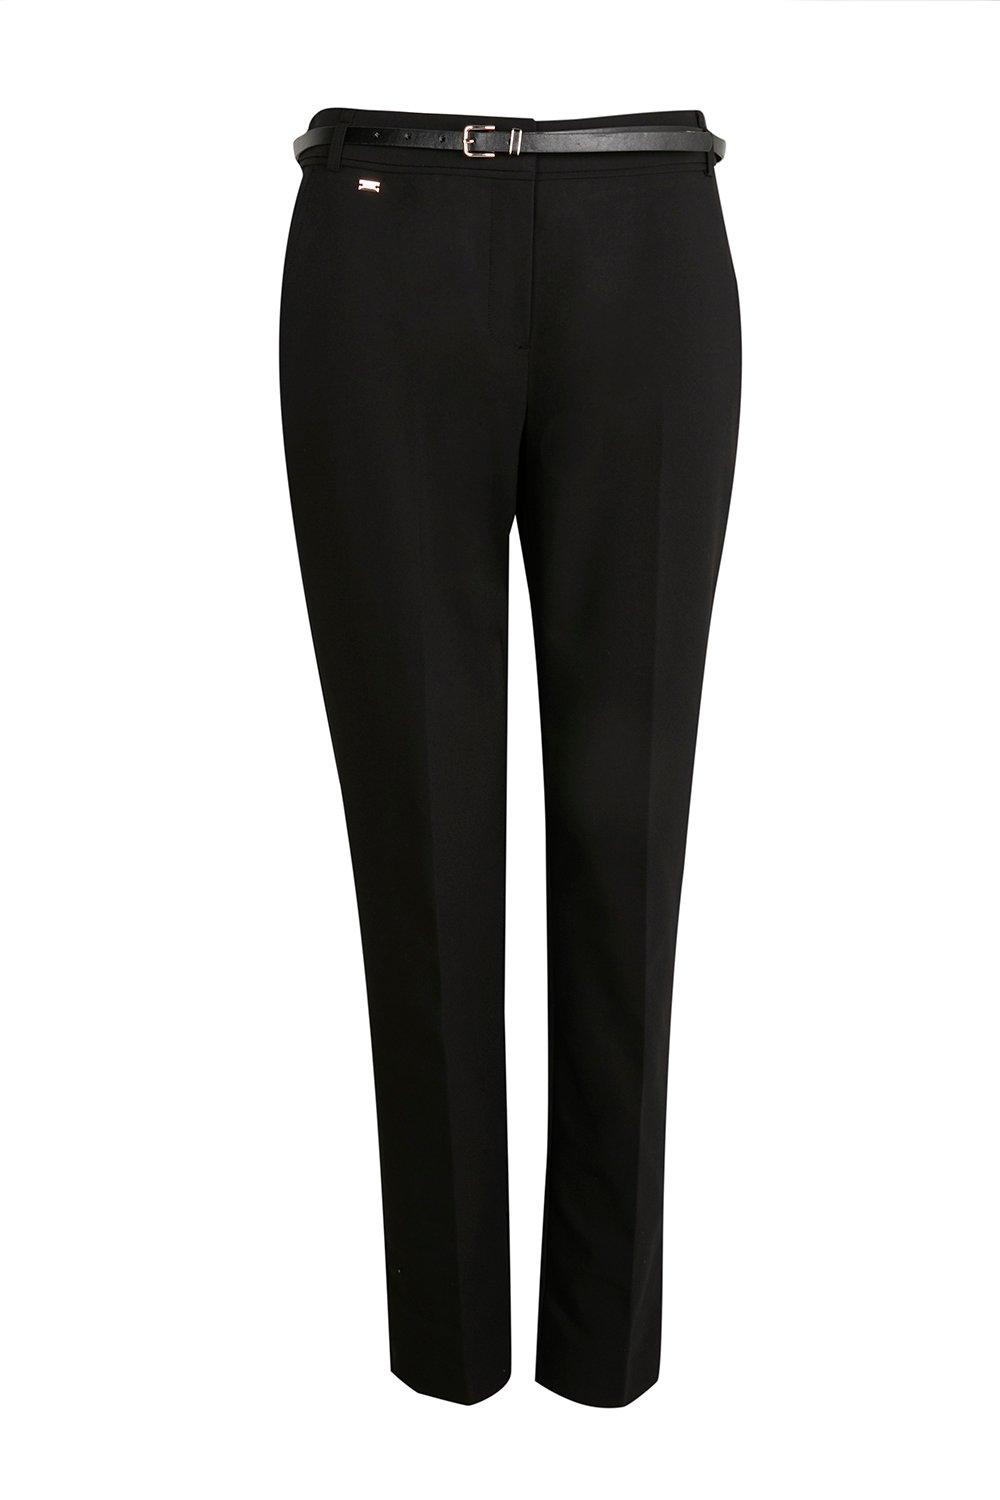 Pick Up A Wardrobe Staple With These Black Belted Cigarette Trousers. A Sleek Black Hue Keeps These Sophisticated And Timeless, So They'Re A Must-Have For Your Work Wardrobe. Tuck In A White Blouse And Team With Heeled Courts For A Timeless Look.  Trouser